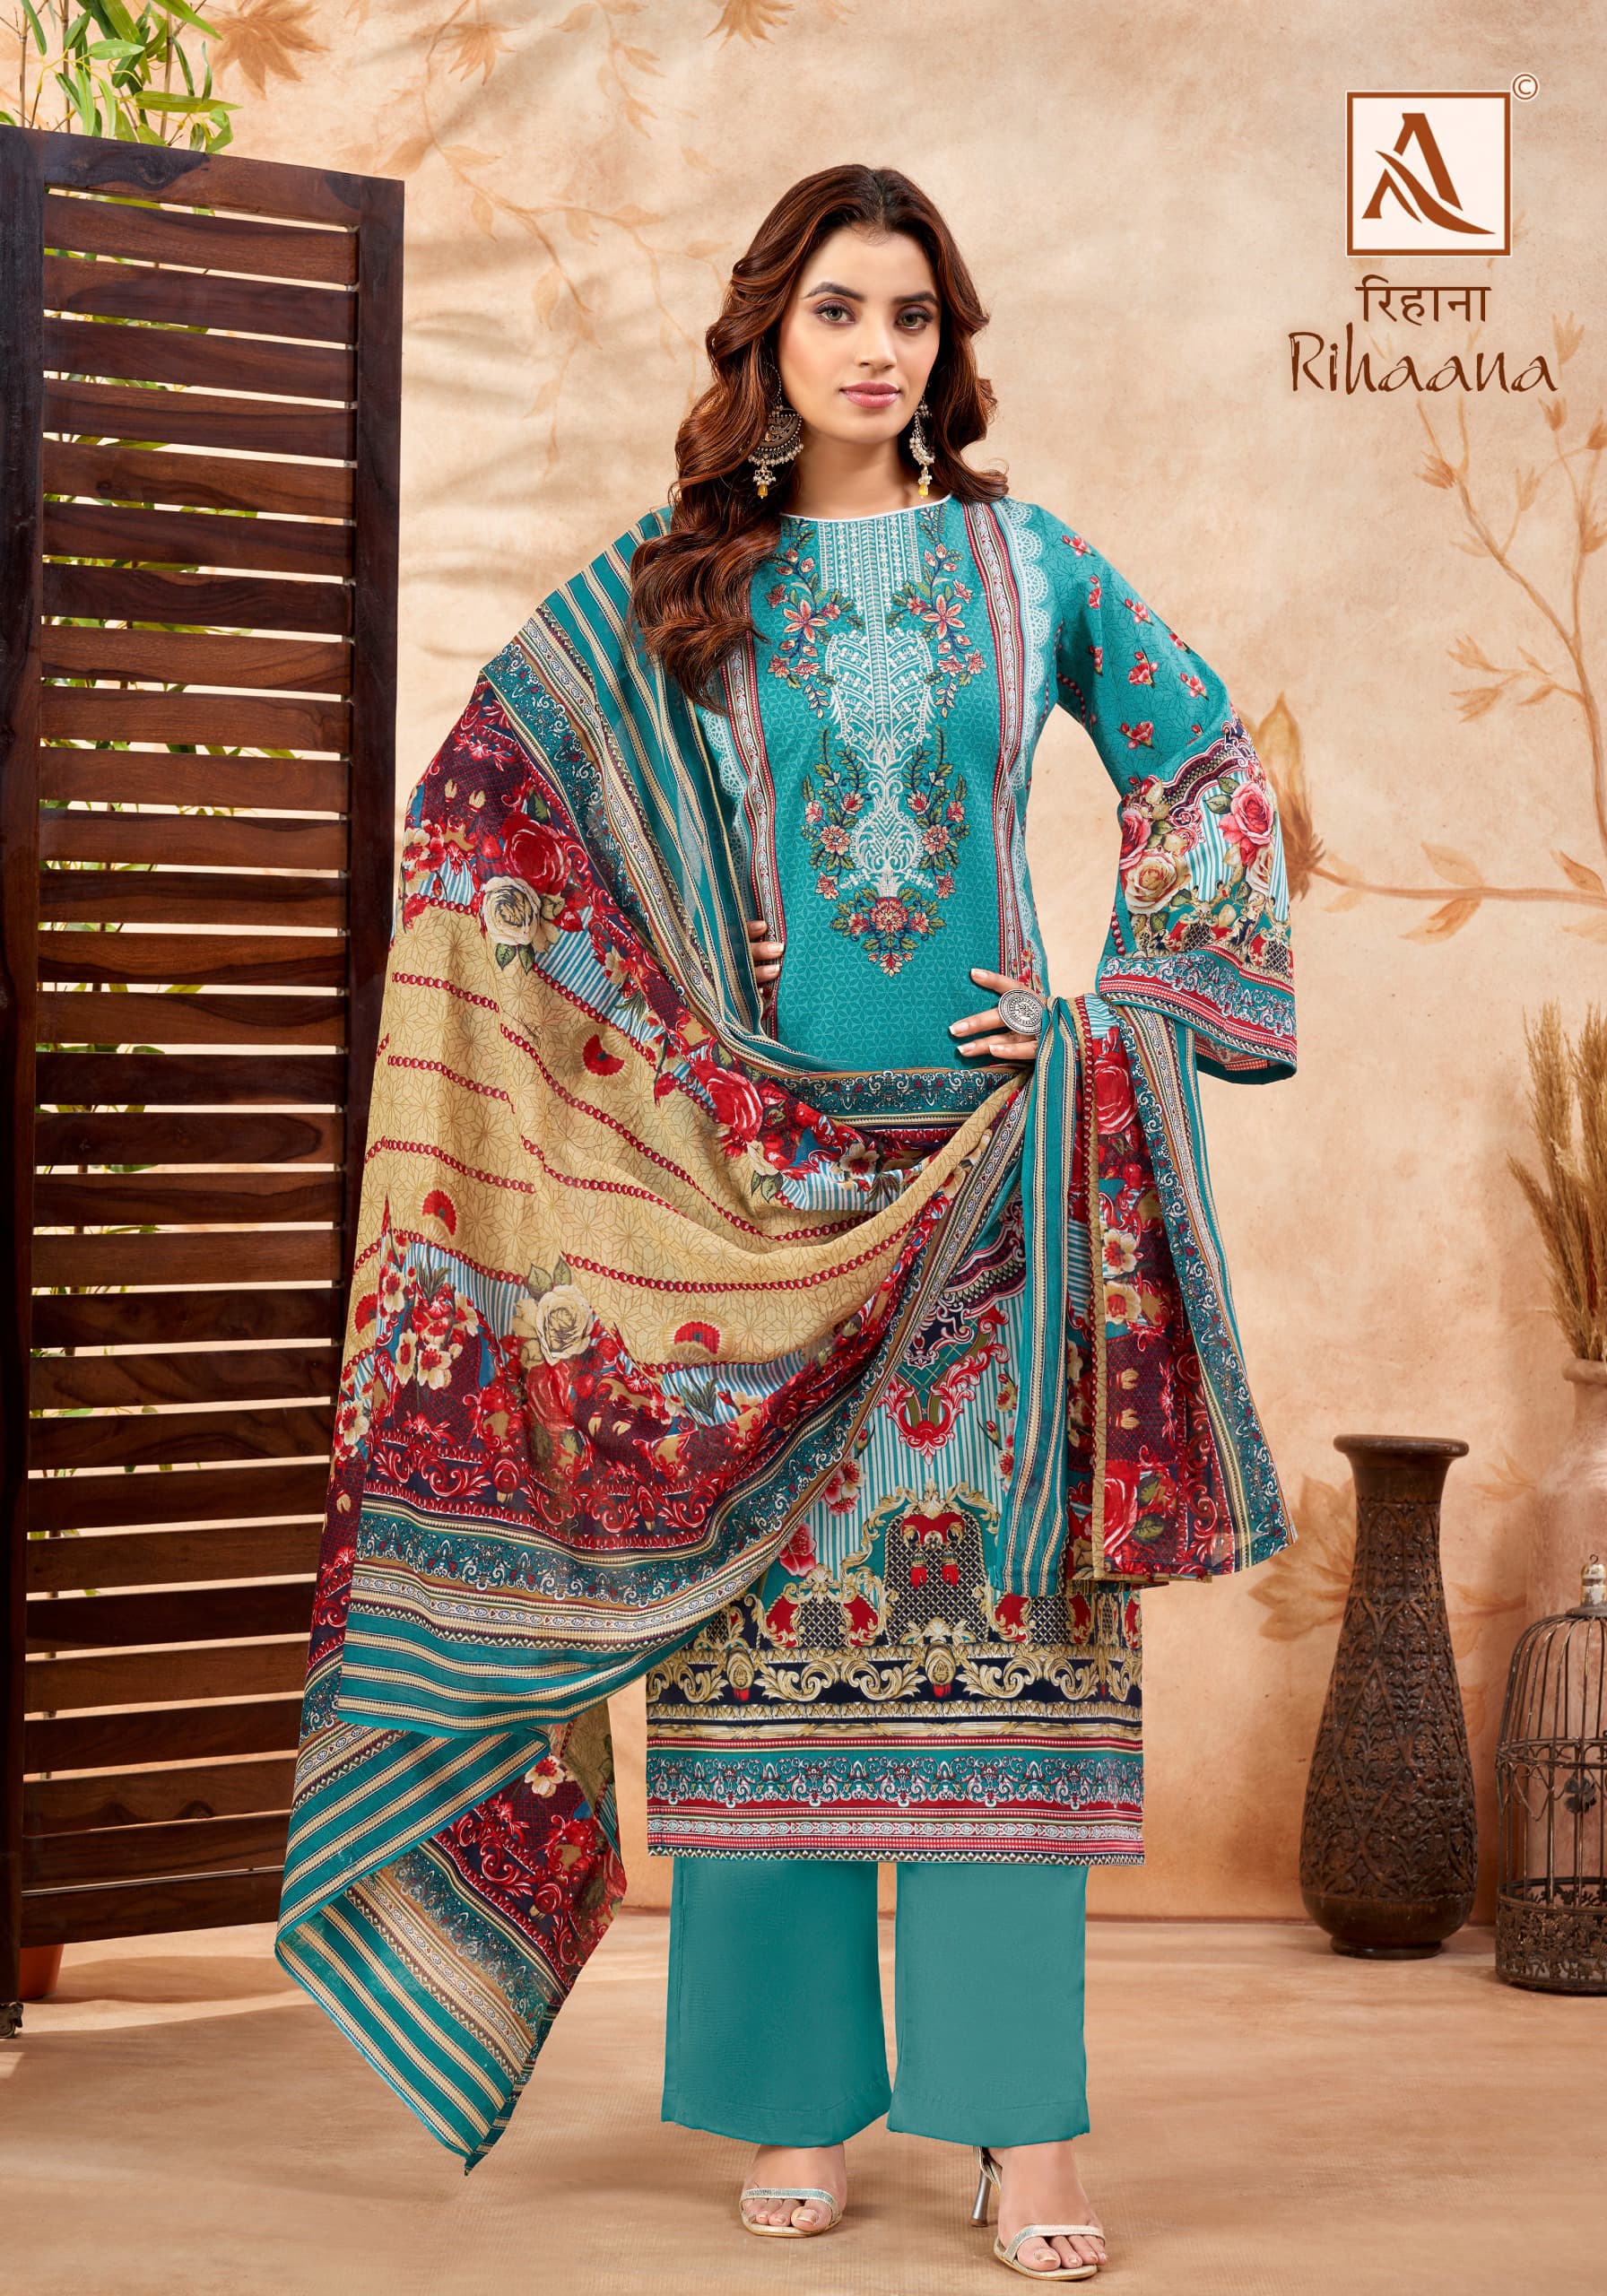 Alok Rihaana Wholesale Pure Cambric Cotton With Embroidery Dress Material